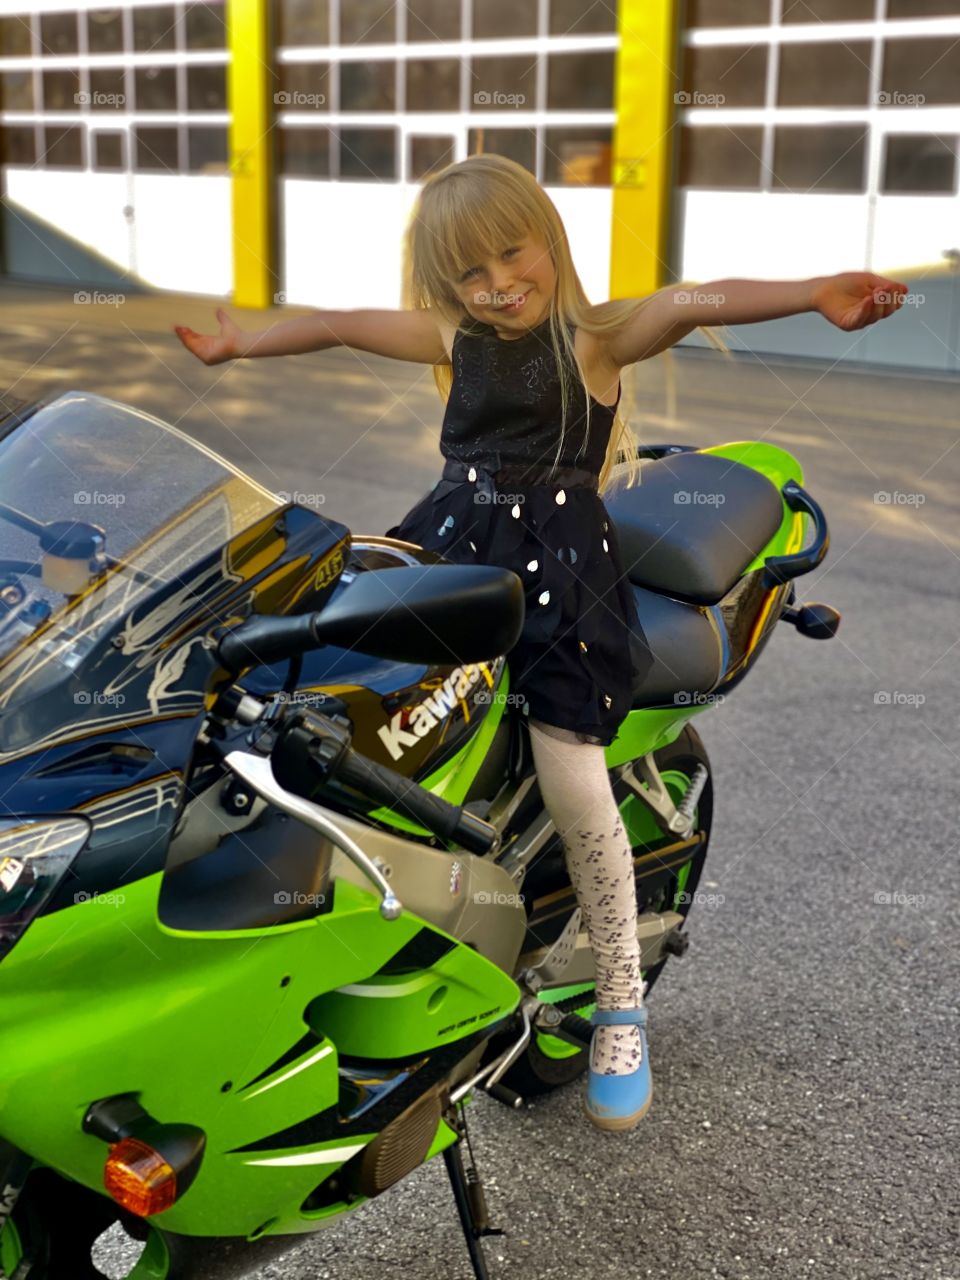 blonde girl on a green sport motorcycle